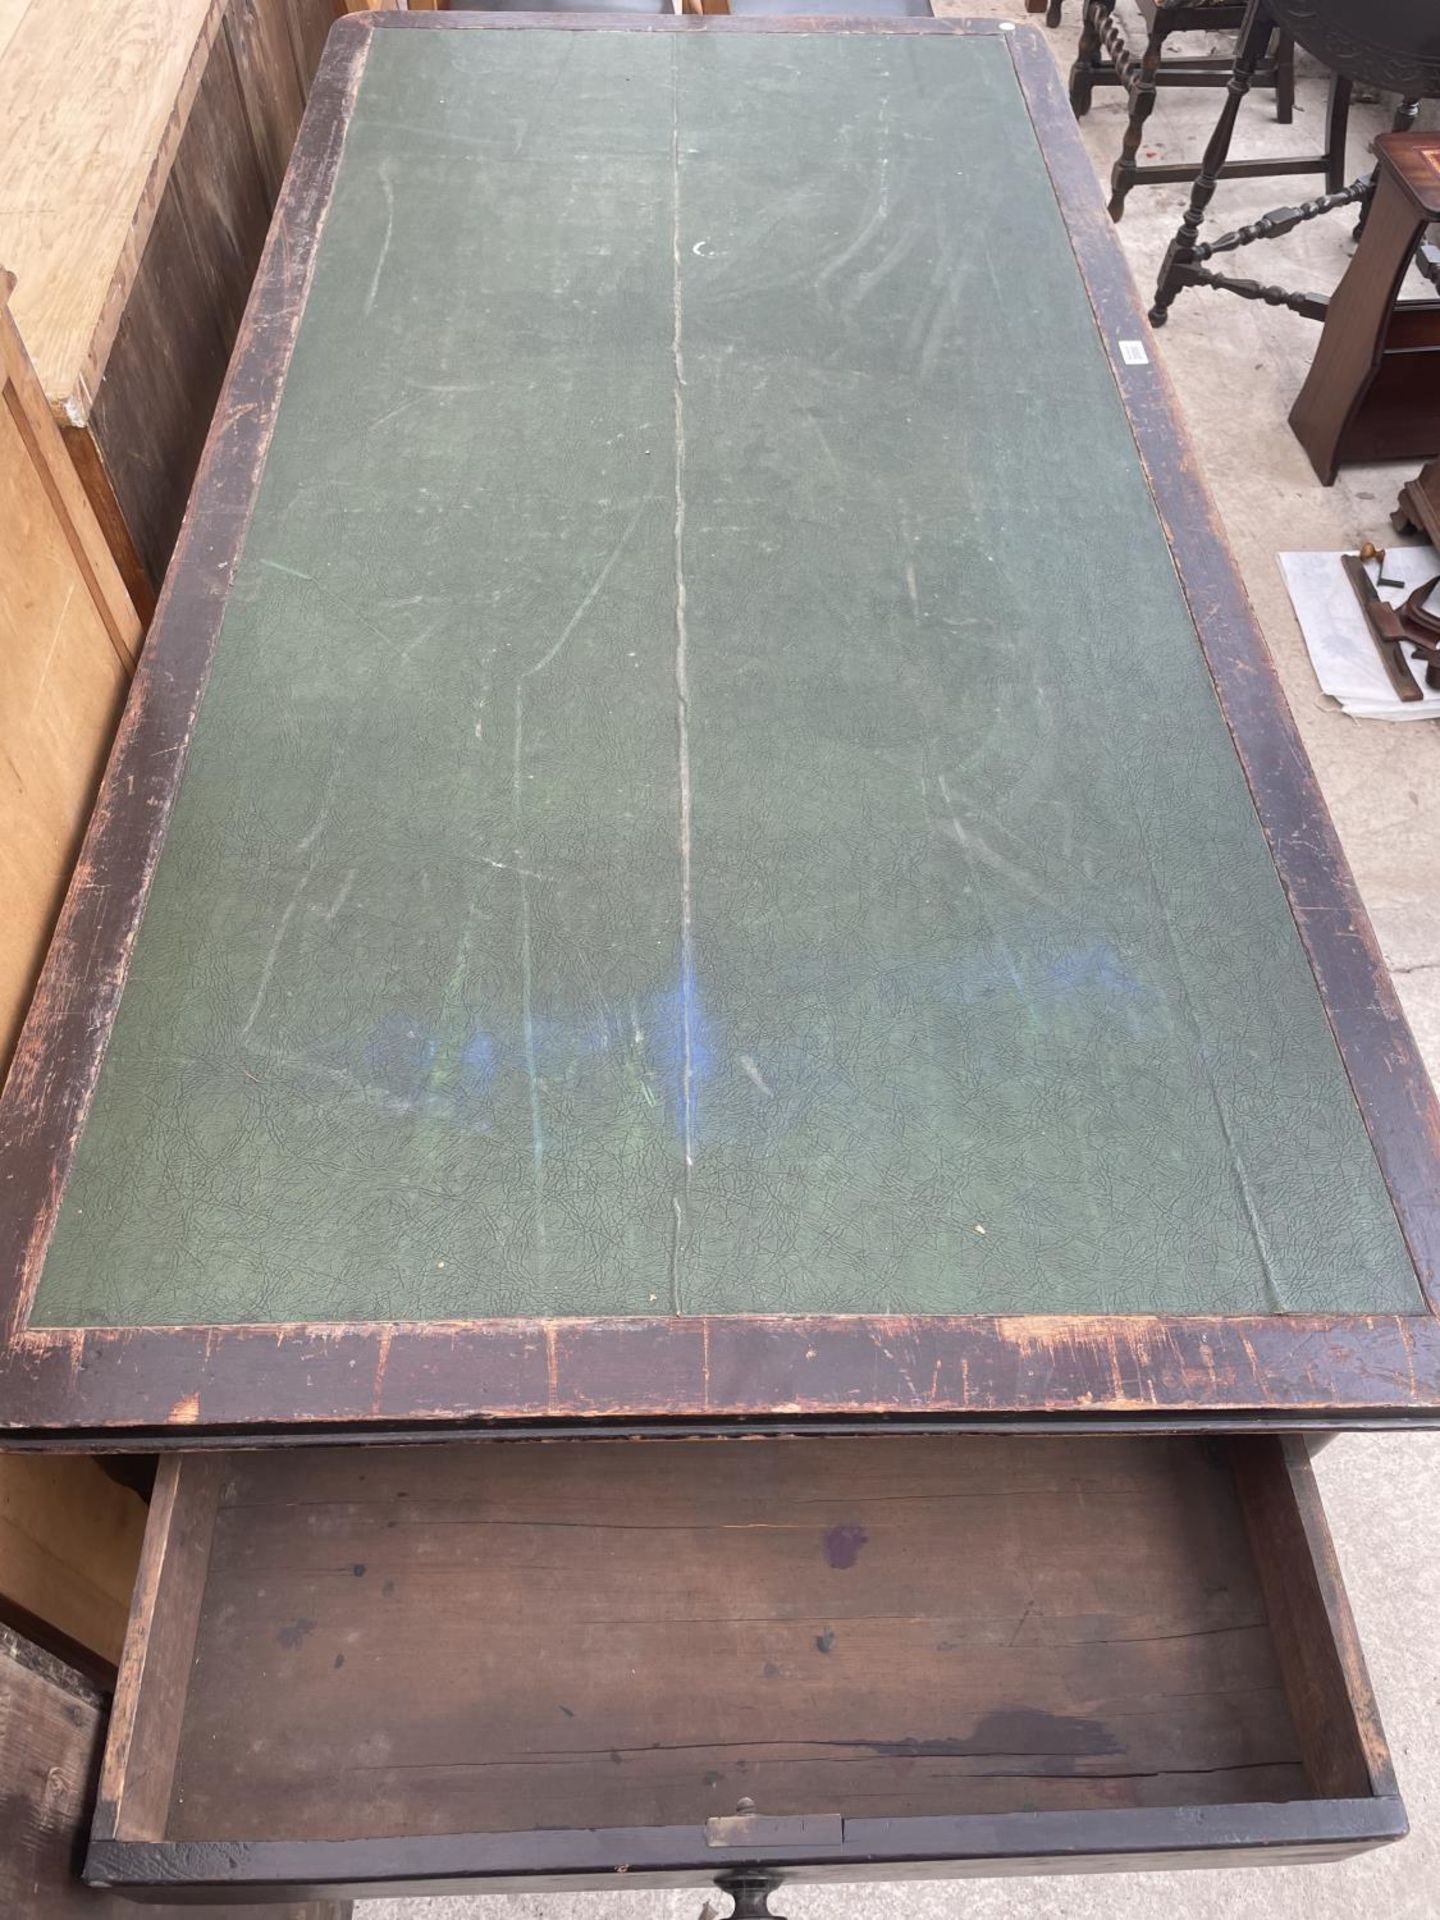 A VICTORIAN PINE OFFICE TABLE WITH TWO DRAWERS, ON TURNED LEGS, 71X36" WITH INSET LEATHERETTE TOP - Image 4 of 5